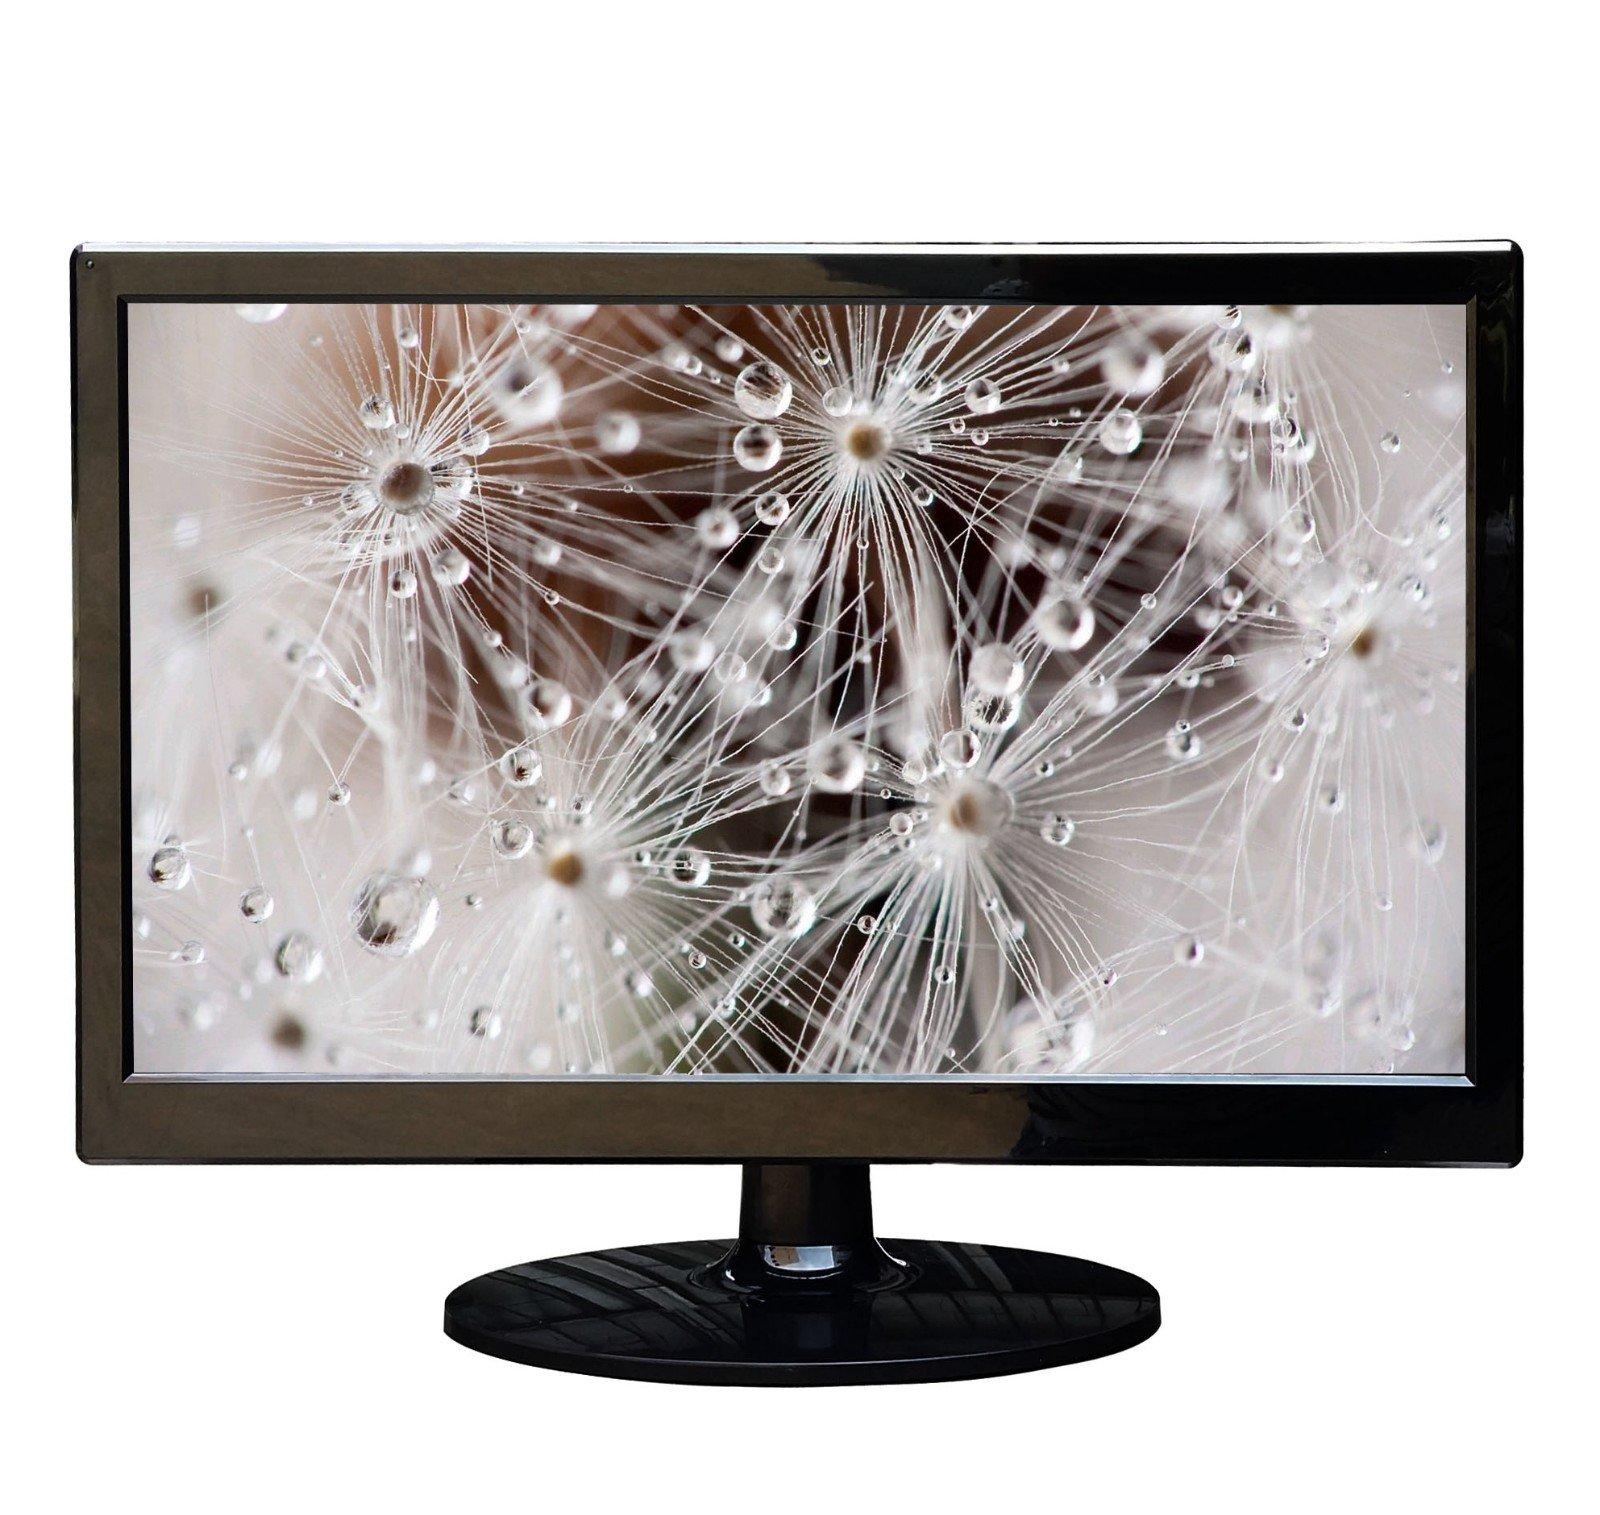 lcd 19 inch monitor for lcd screen Xinyao LCD